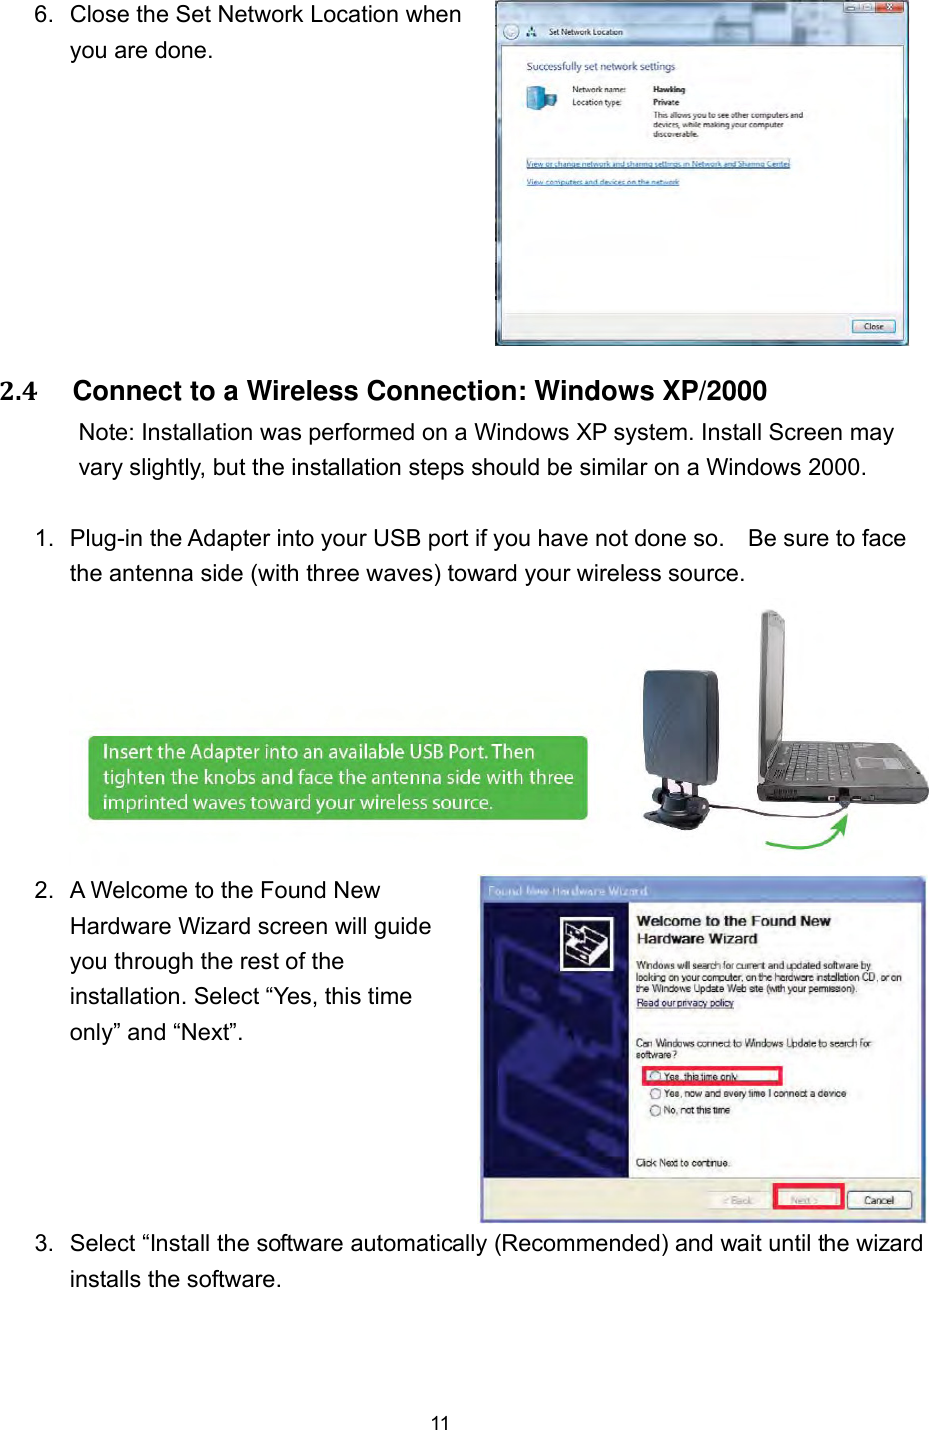  11 6.  Close the Set Network Location when you are done.  2.4     Connect to a Wireless Connection: Windows XP/2000 Note: Installation was performed on a Windows XP system. Install Screen may vary slightly, but the installation steps should be similar on a Windows 2000.      1.  Plug-in the Adapter into your USB port if you have not done so.    Be sure to face the antenna side (with three waves) toward your wireless source. 2.  A Welcome to the Found New Hardware Wizard screen will guide you through the rest of the installation. Select “Yes, this time only” and “Next”.    3.  Select “Install the software automatically (Recommended) and wait until the wizard installs the software. 